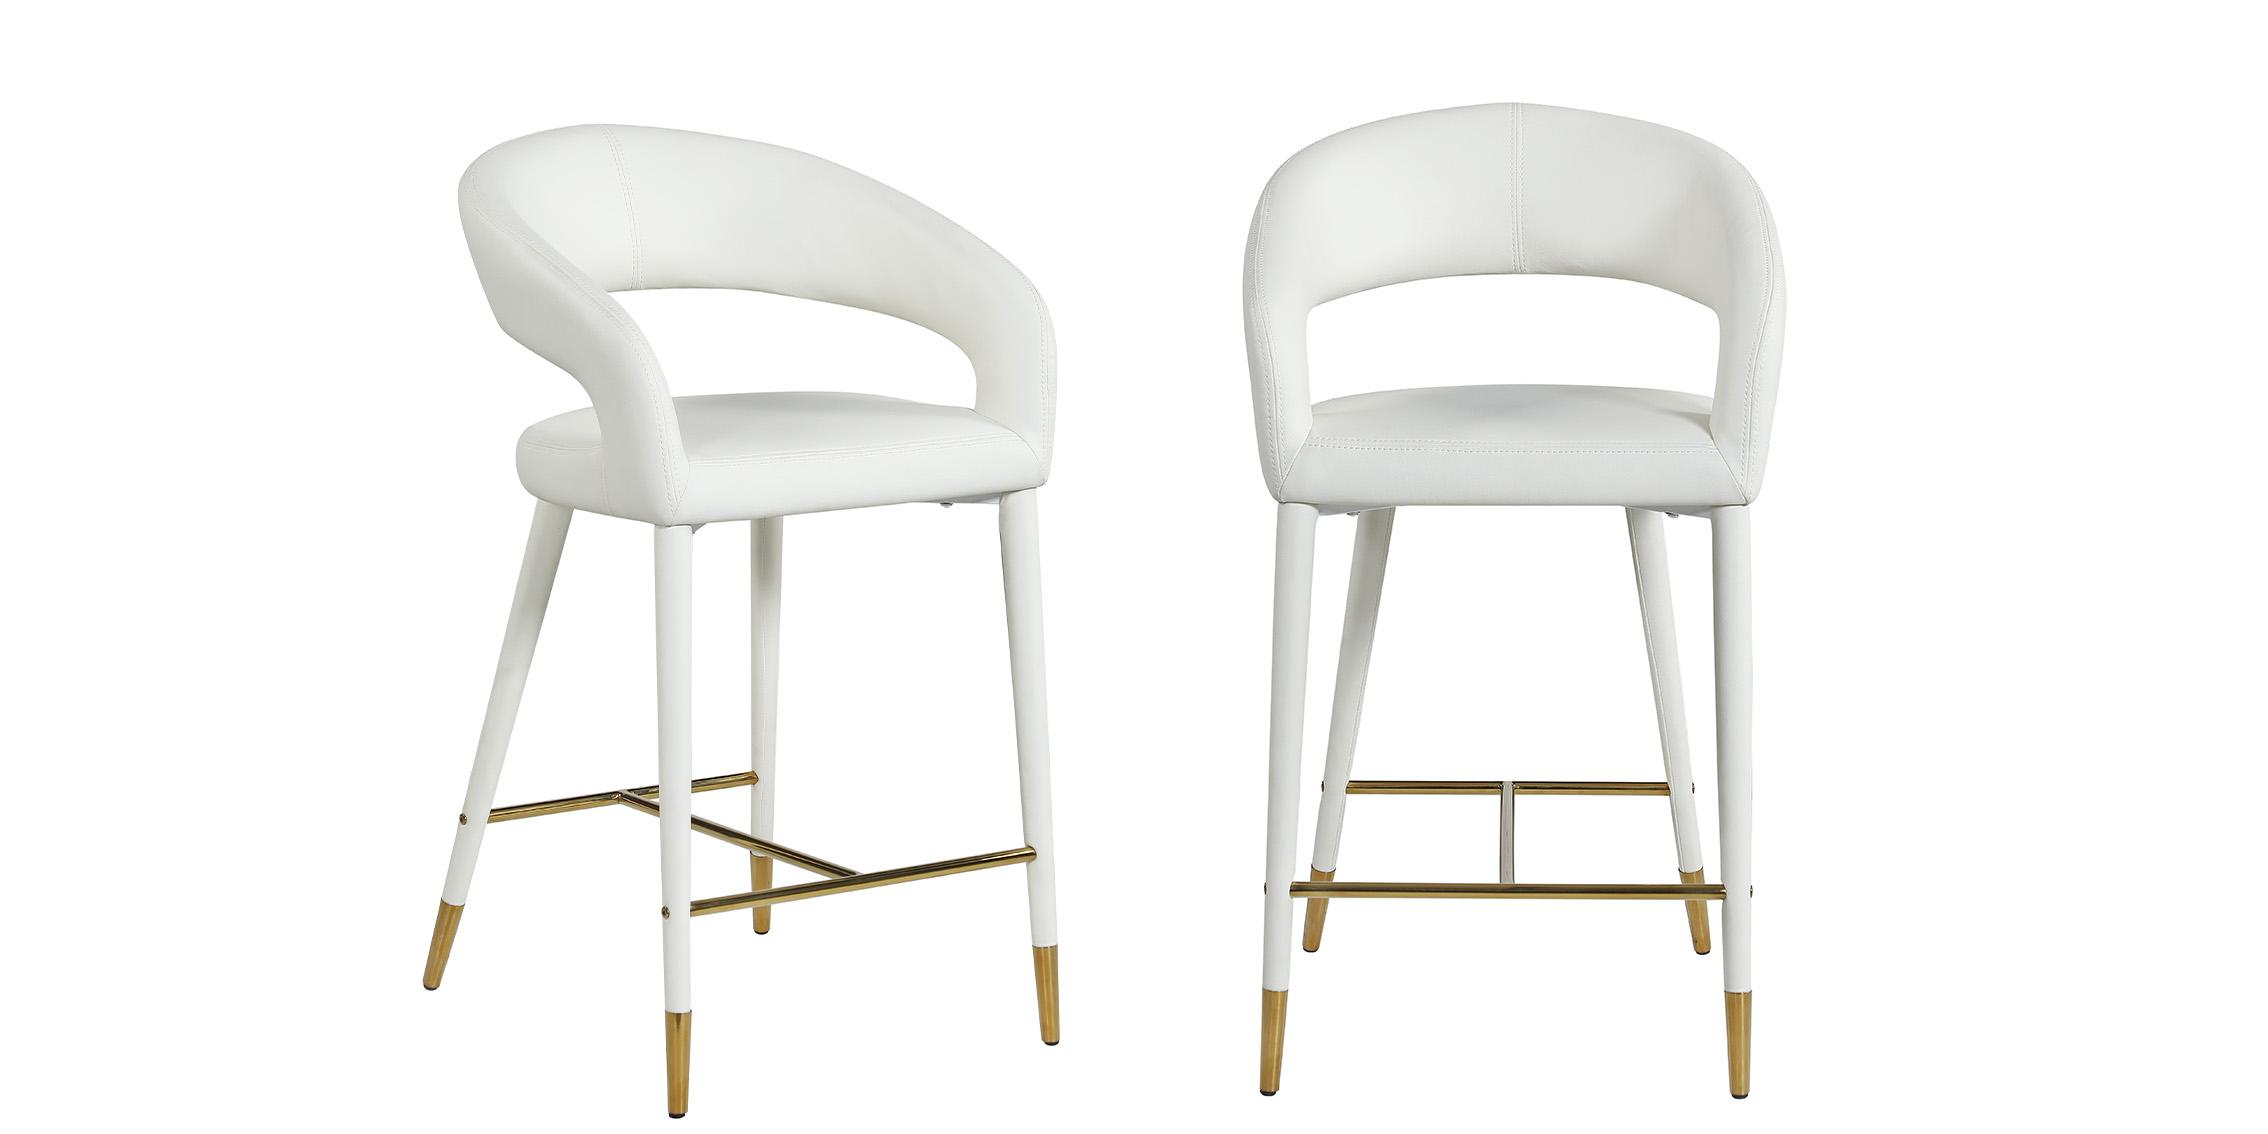 Contemporary, Modern Counter Stools Set DESTINY 541White-C 541White-C-Set-2 in White, Gold Faux Leather